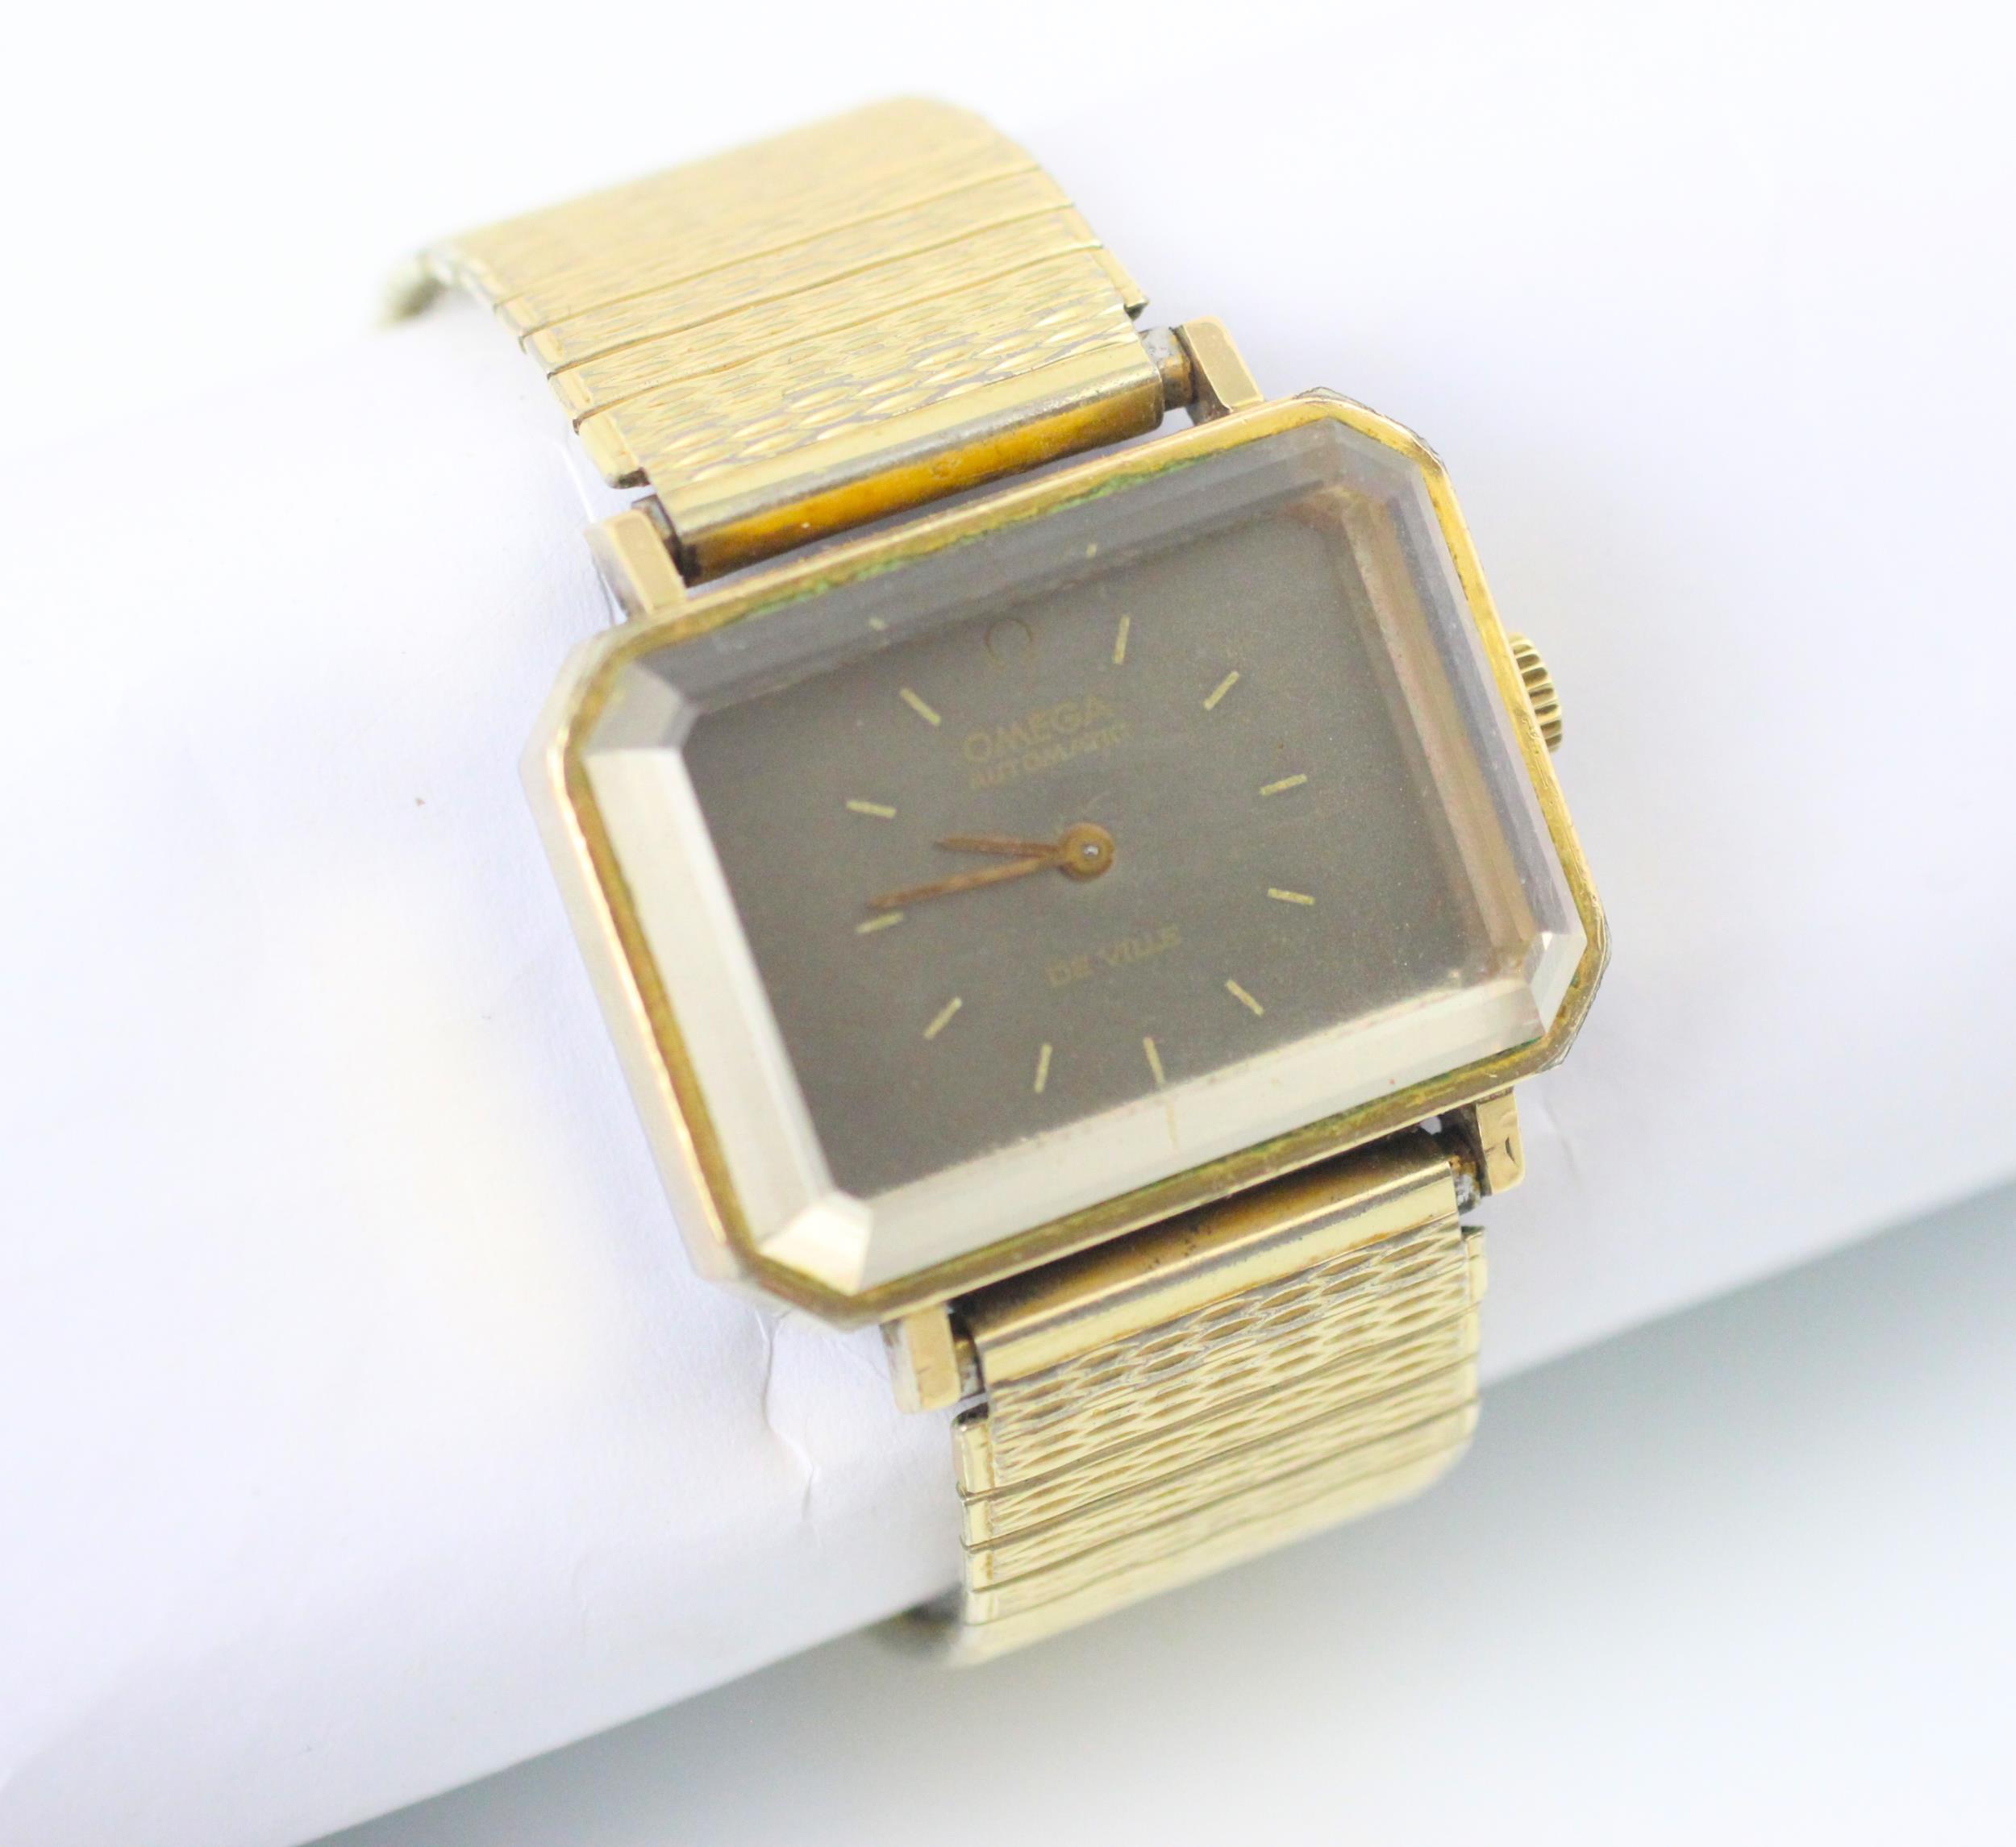 An Omega Automatic DeVille gold plated dress watch, the dial of square canted corner detail with